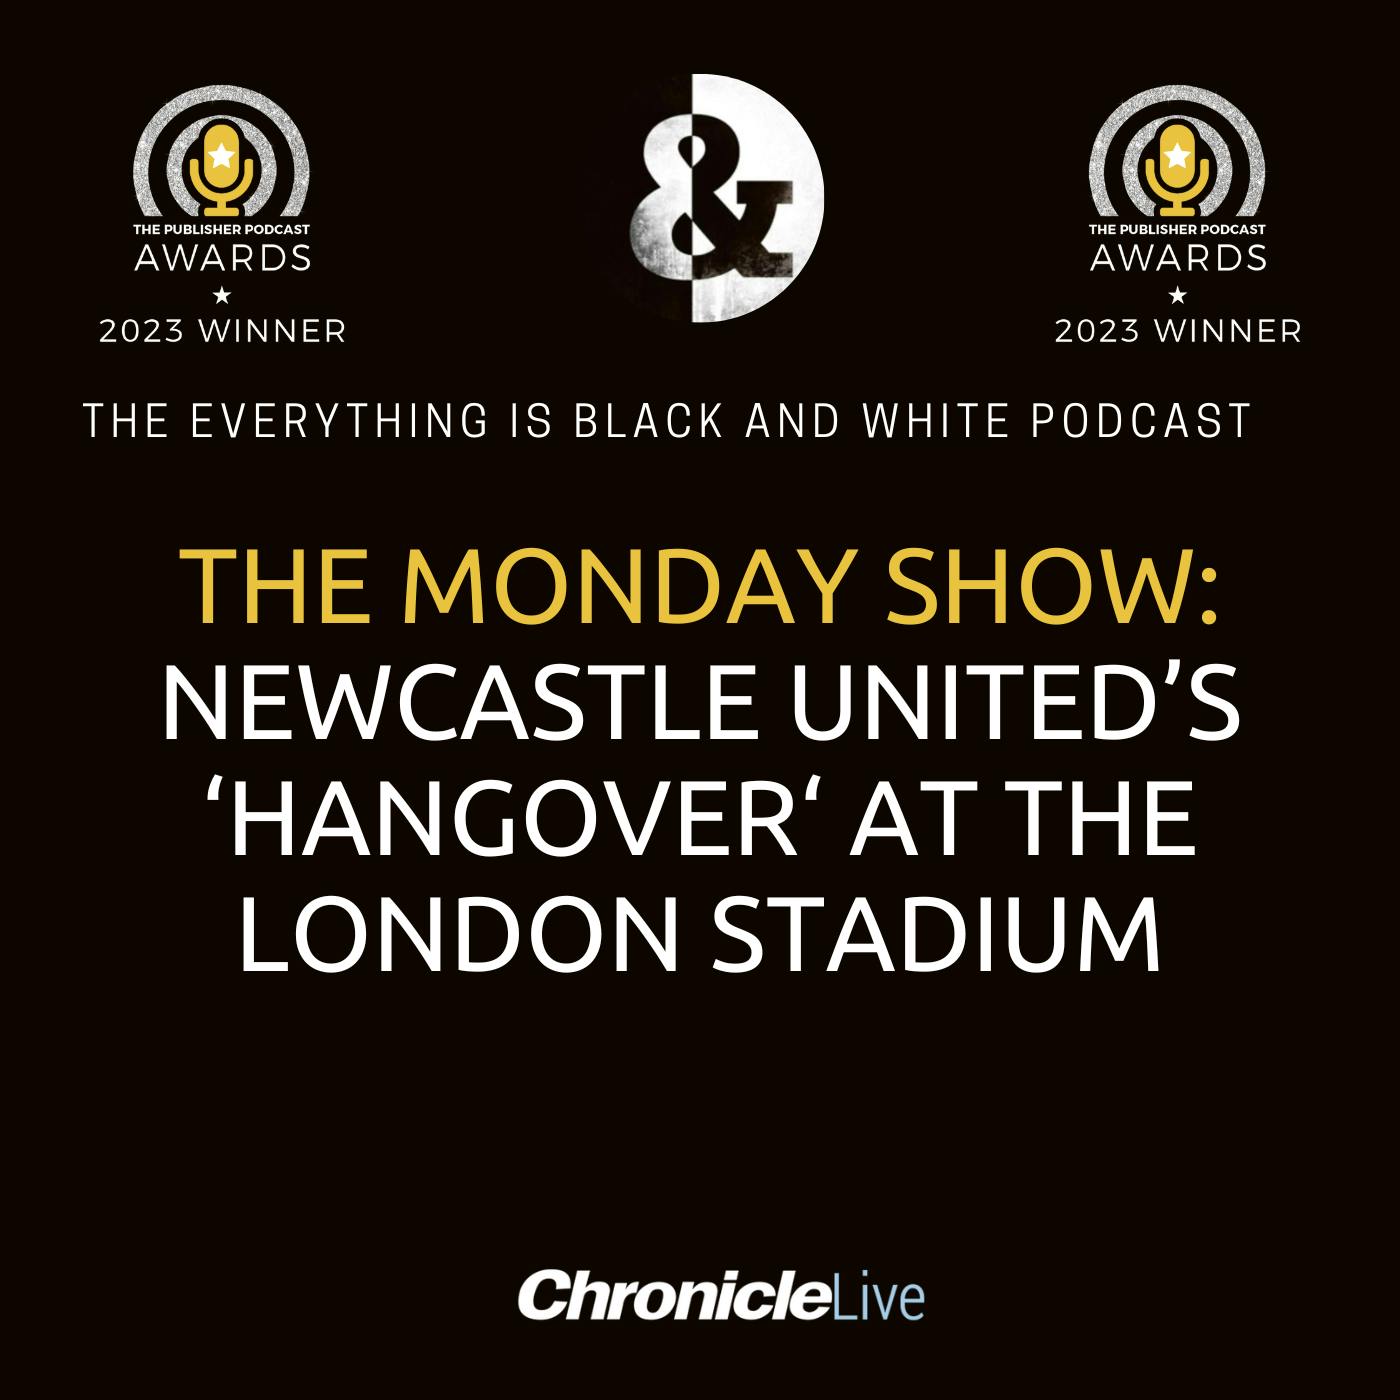 THE MONDAY SHOW: NEWCASTLE'S 'HANGOVER', TONALI DEFENDED, ISAK LAUDED AND POPE DEBATED